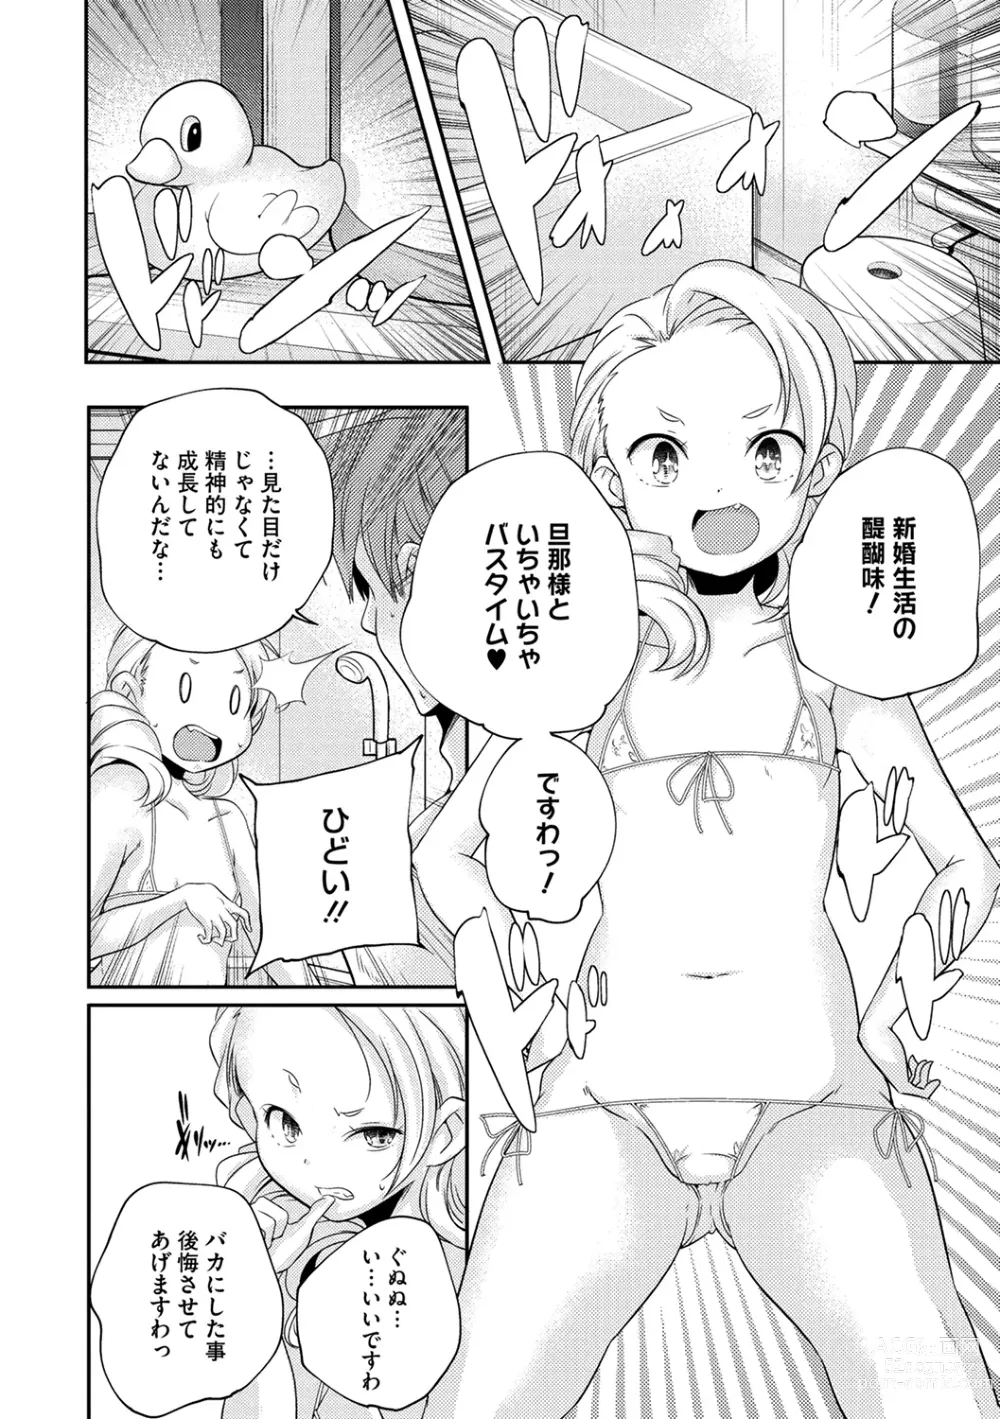 Page 28 of manga LQ -Little Queen- Vol. 52